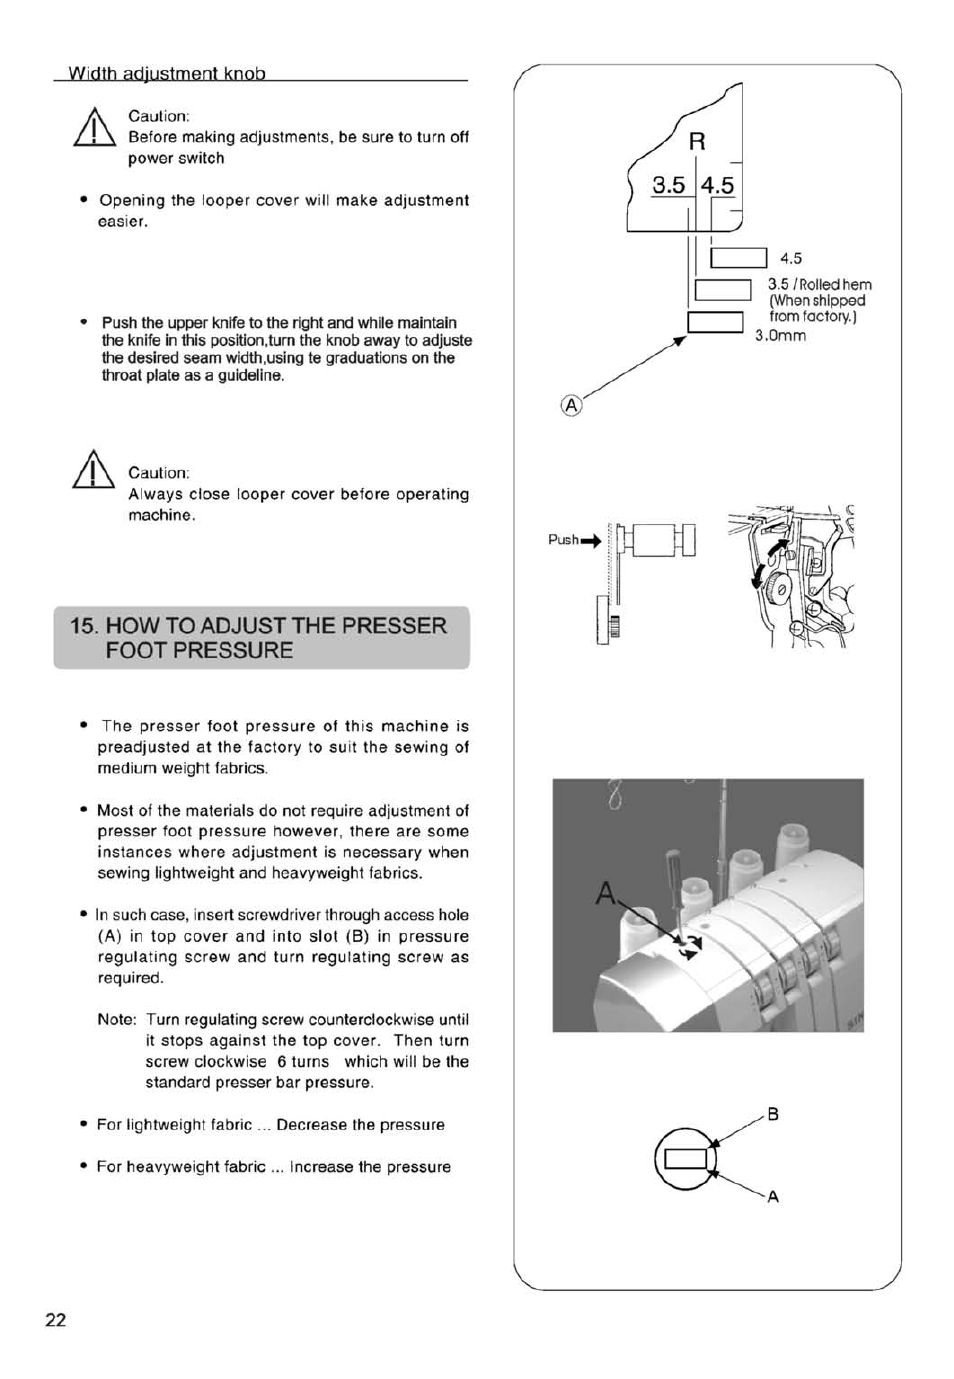 How to adjust the presser foot pressure | SINGER 14SH754/14CG754 User Manual | Page 23 / 53